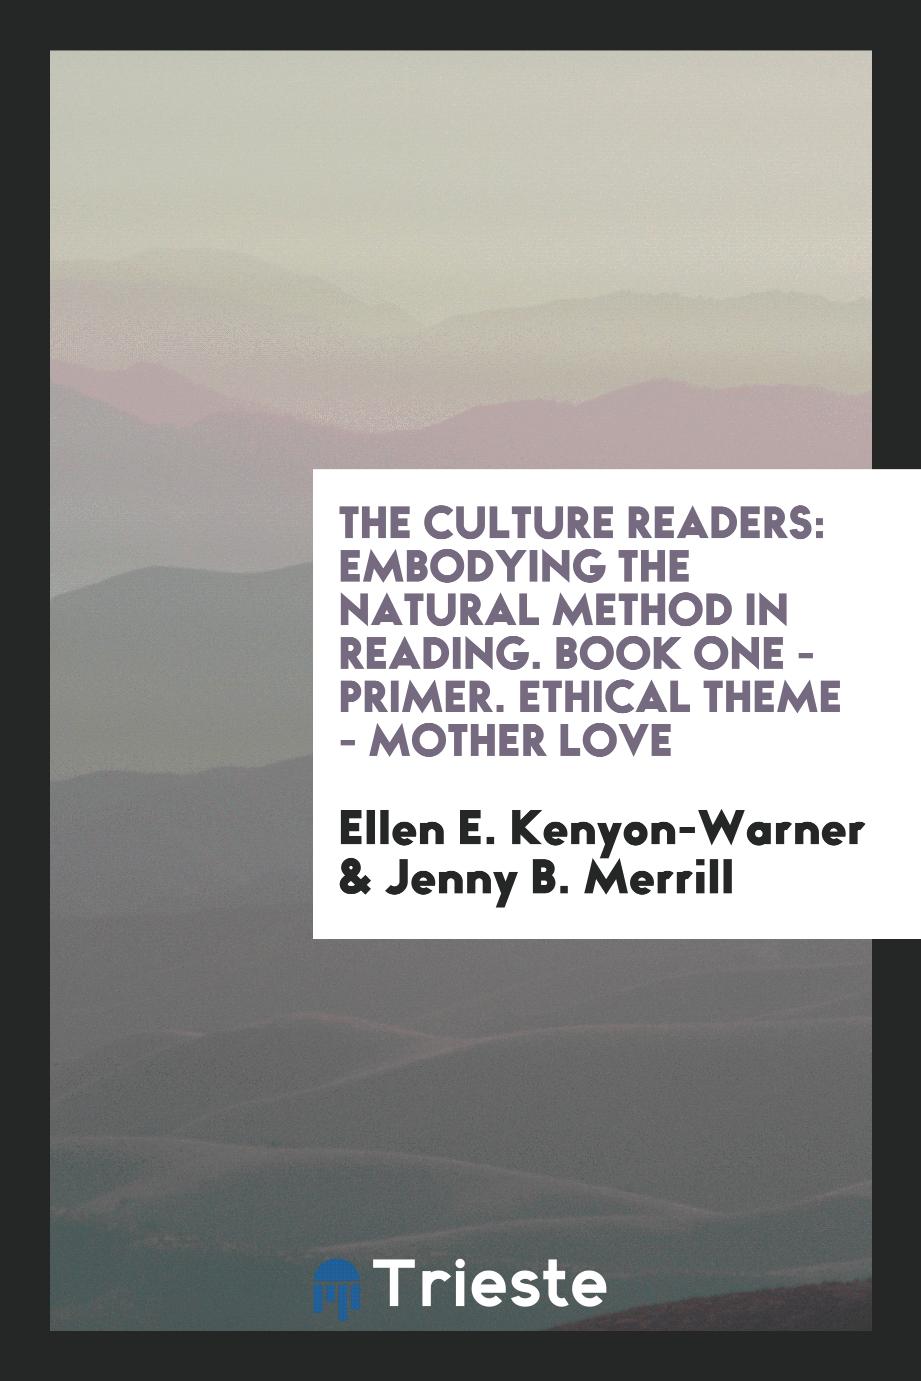 The Culture Readers: Embodying the Natural Method in Reading. Book One - Primer. Ethical Theme - Mother Love